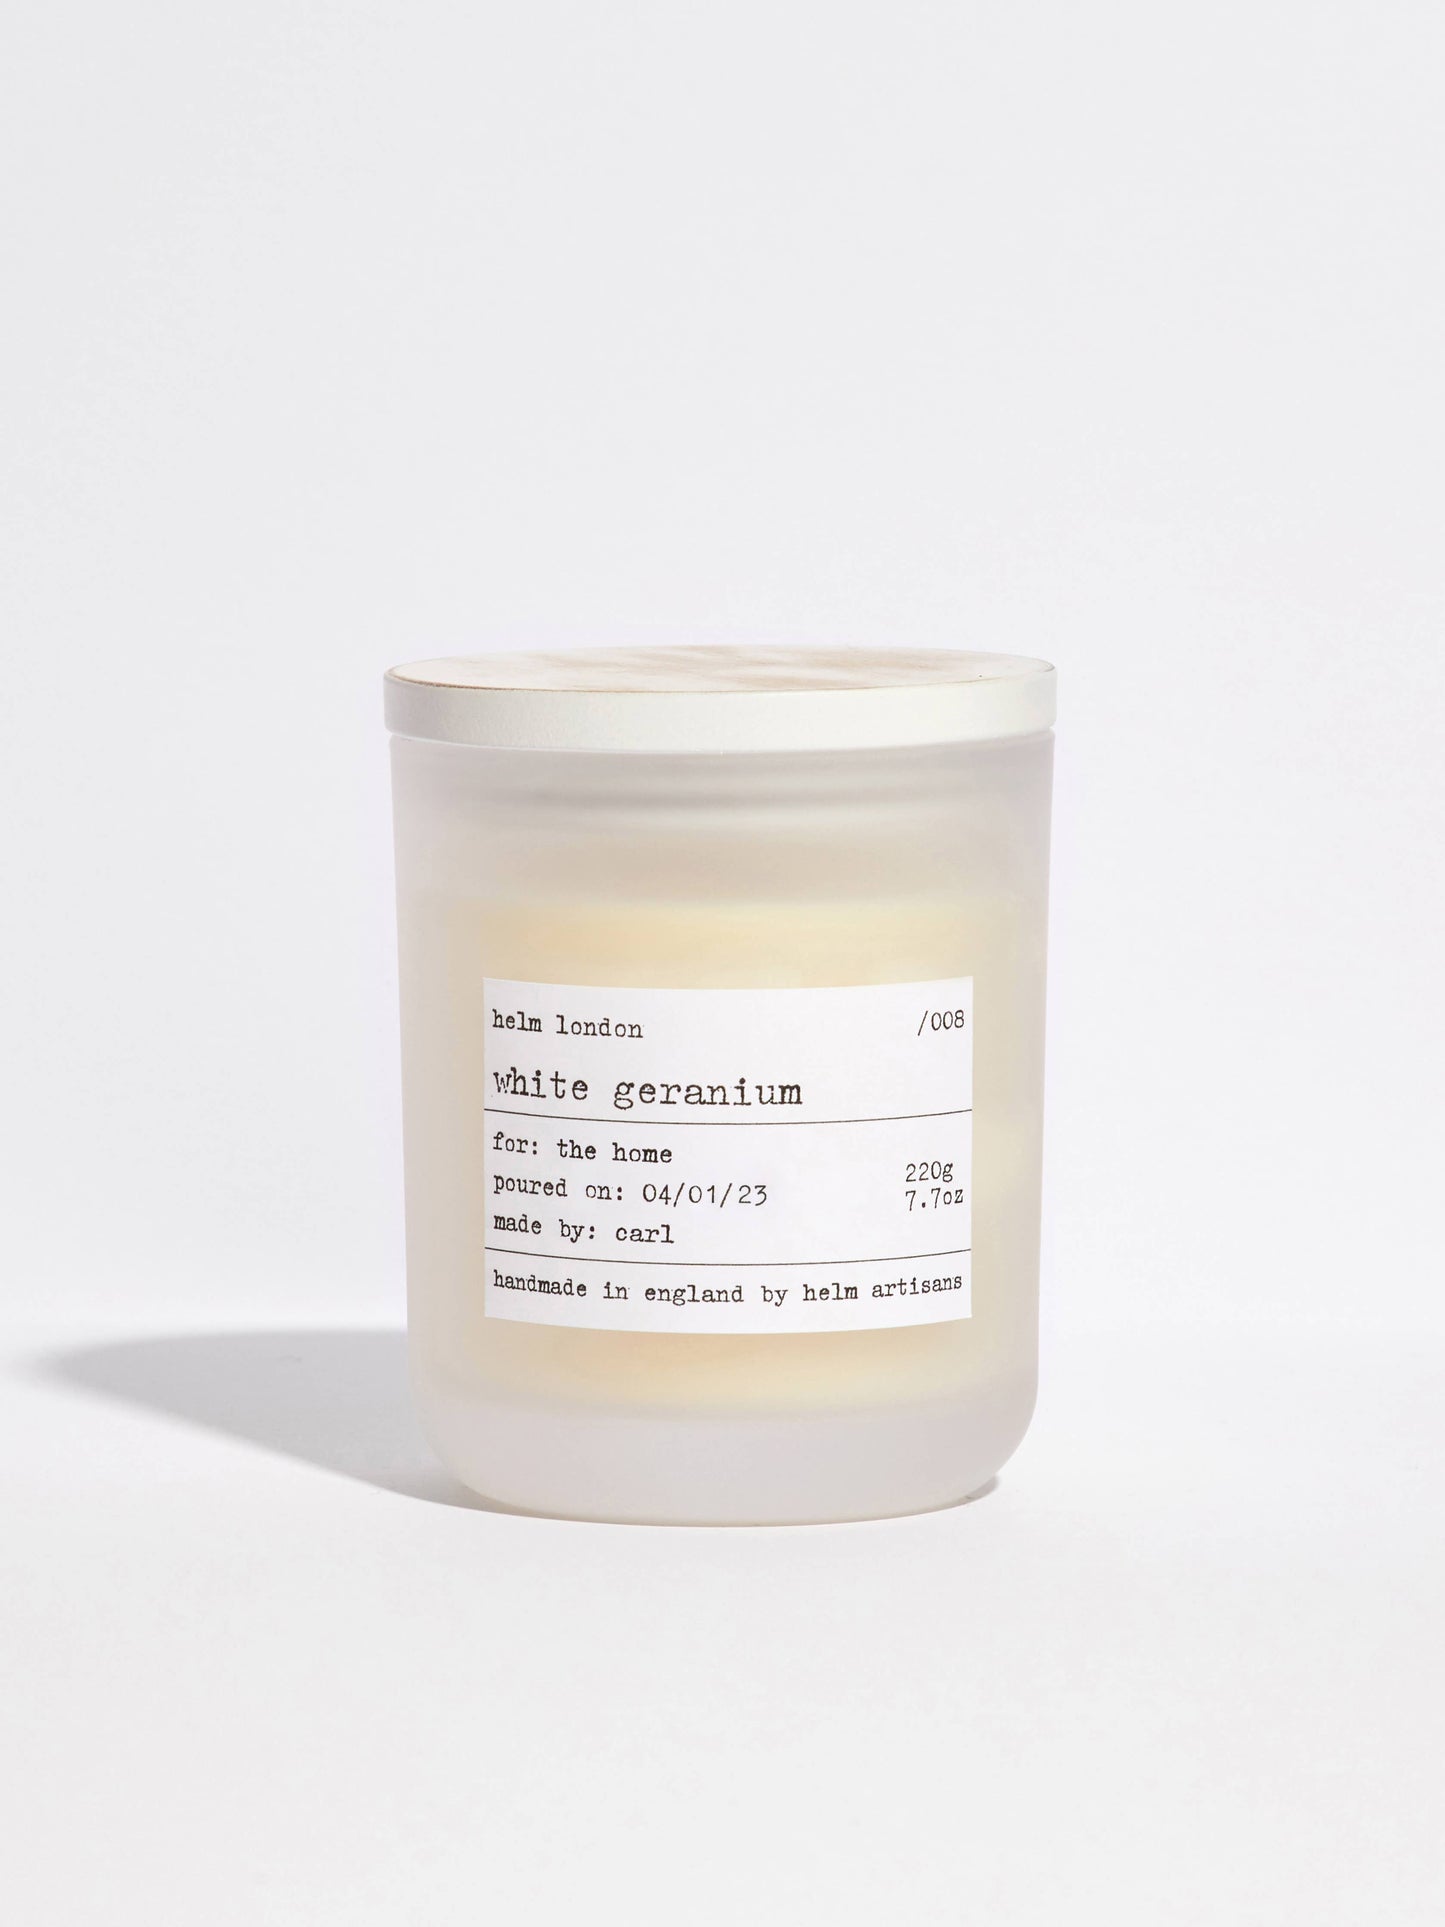 Helm London White Geranium Soy Wax Candle at Joetie Home Fragrance. Luxury Handmade Apothecary Soy Candles